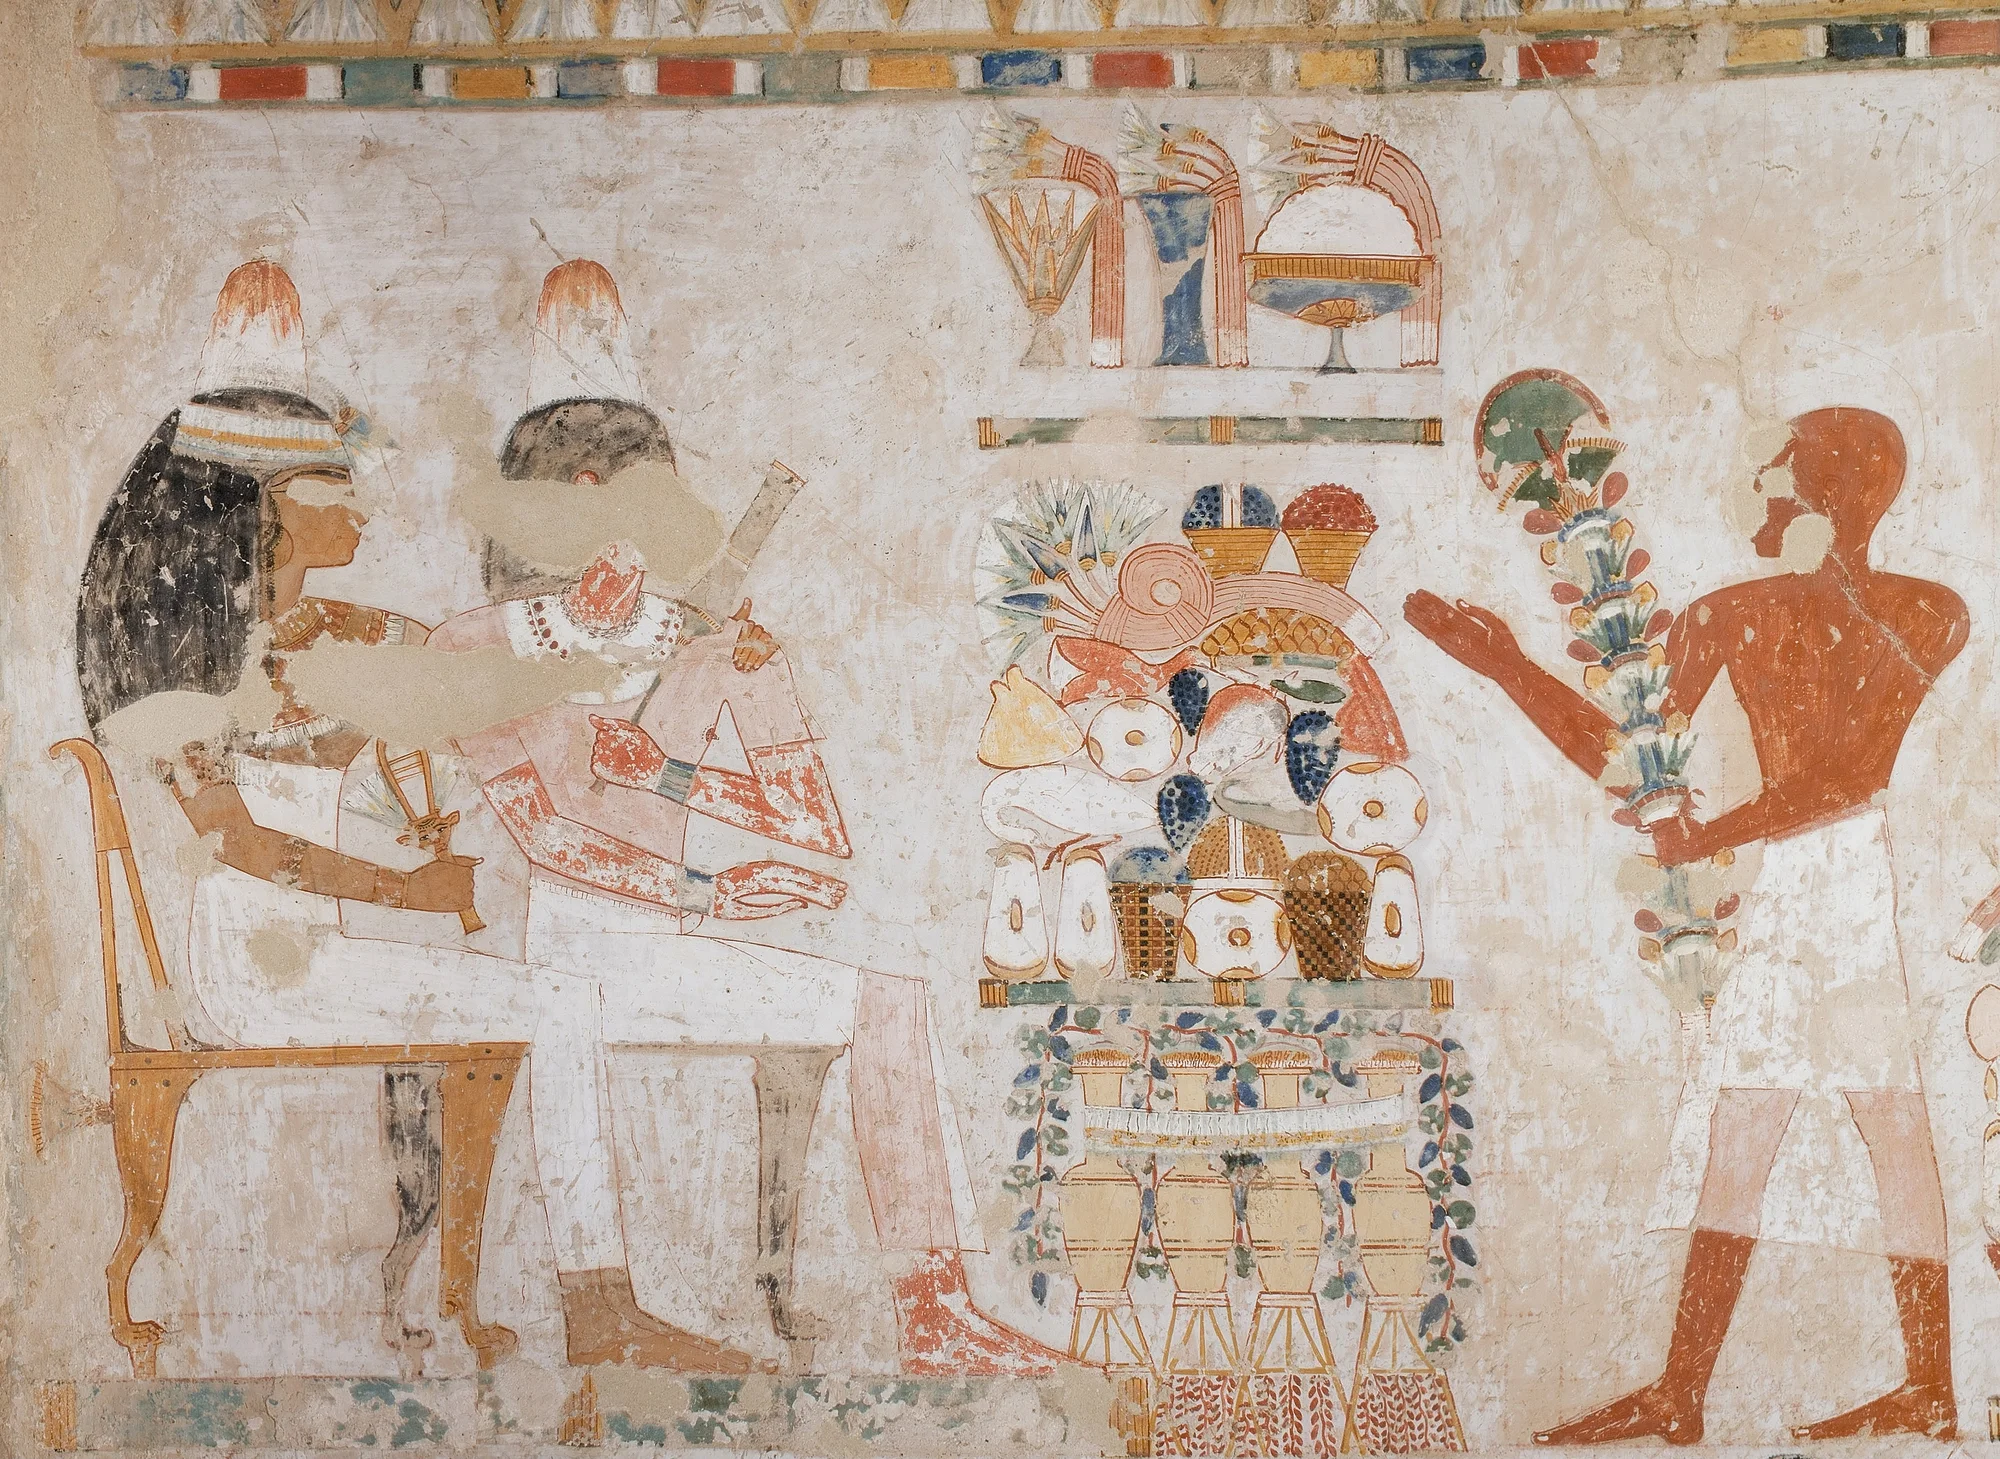 Ancient Egyptian painting depicting people presenting offerings of food and drink to deities.